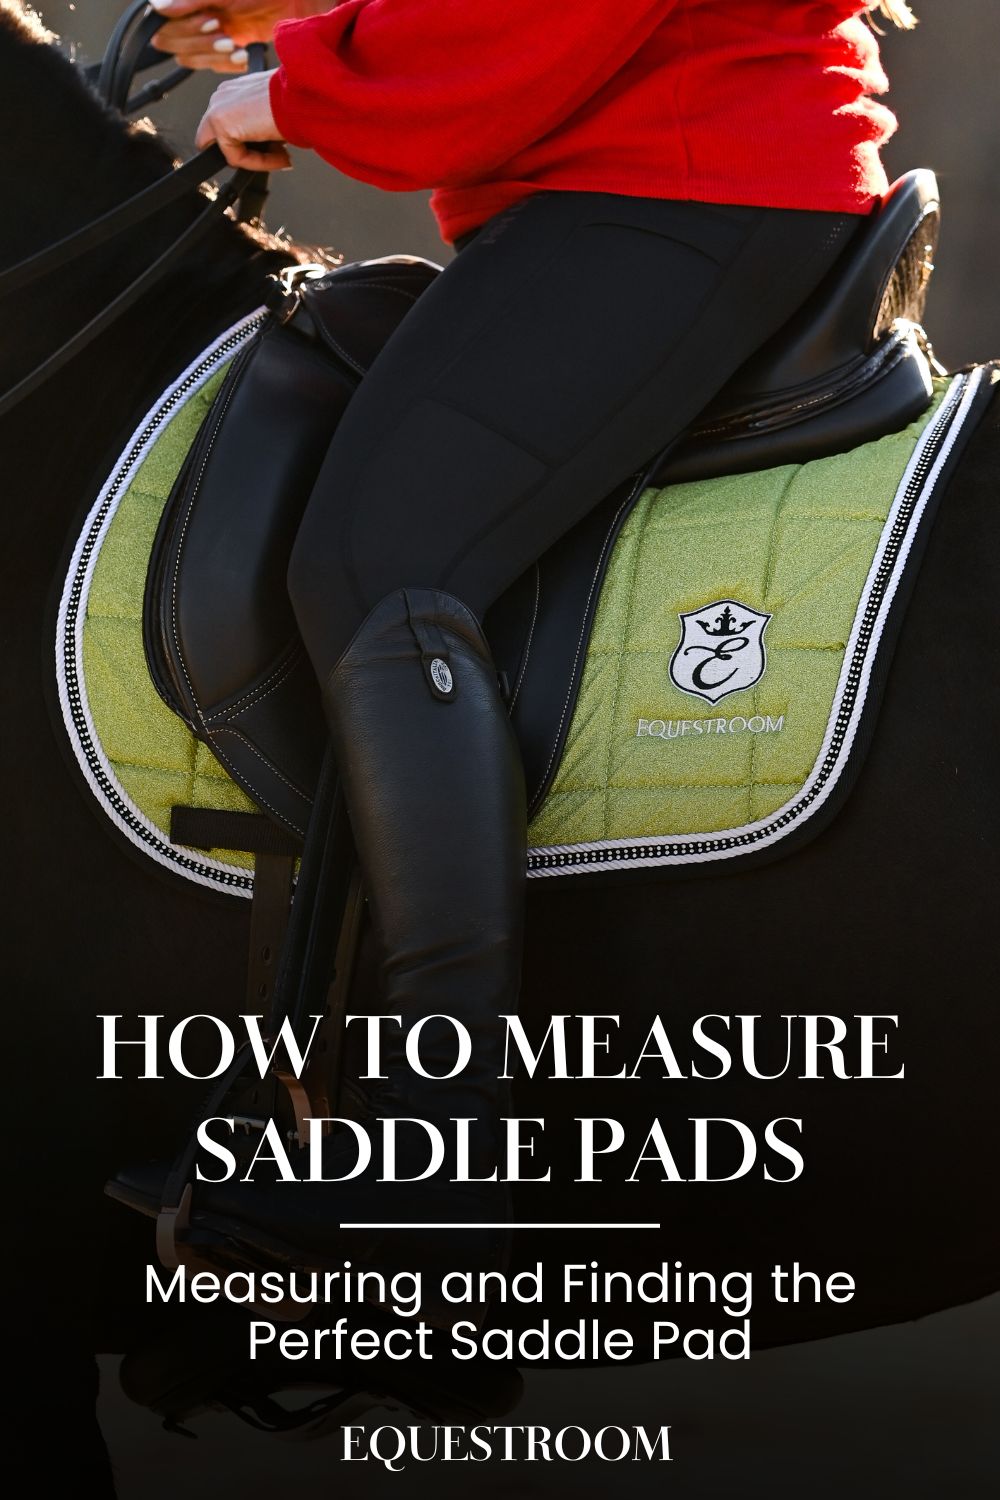 How To Measure Saddle Pads